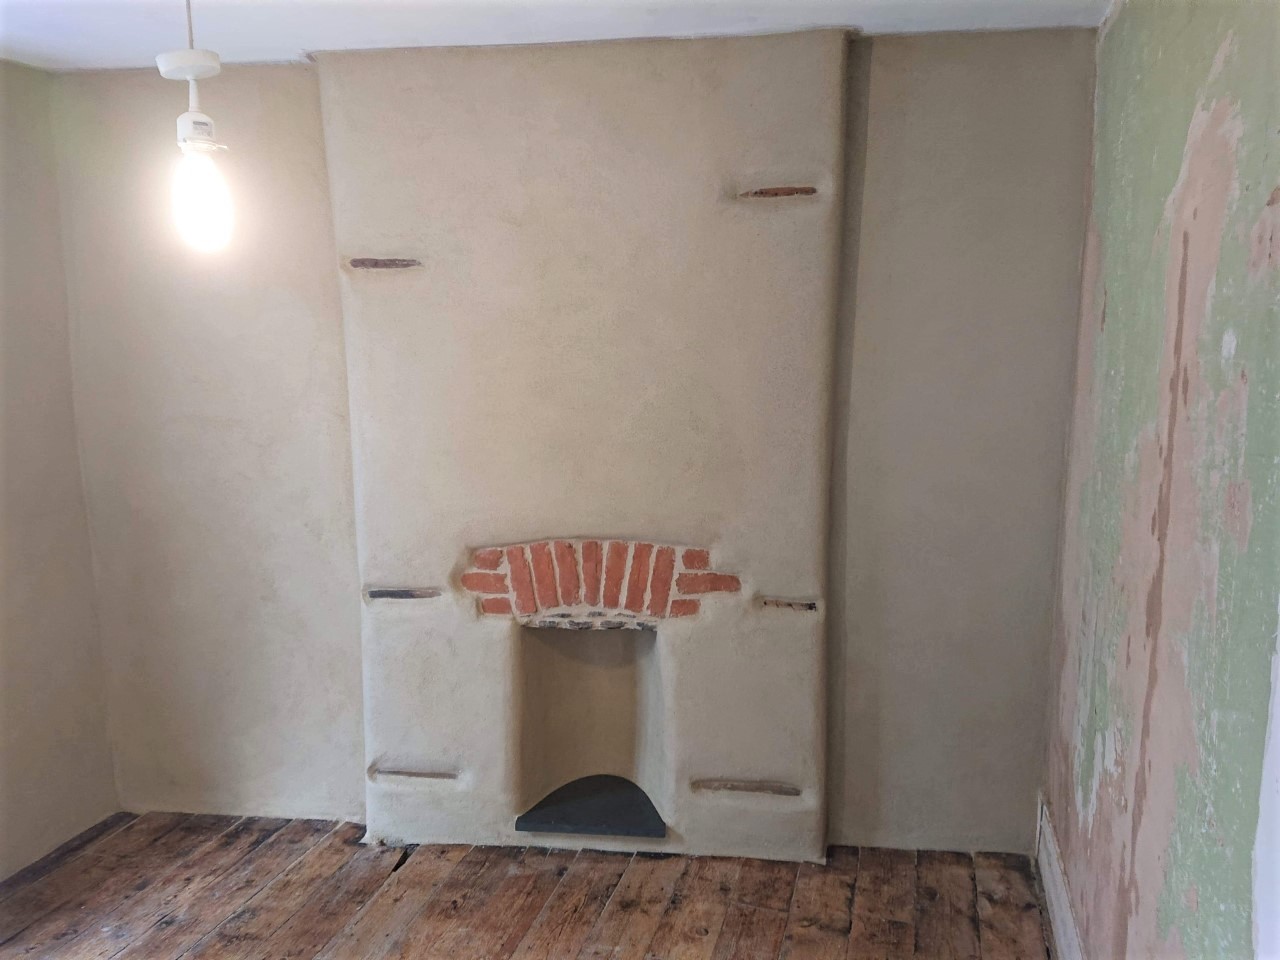 Lime Plastering Fireplace Cornwall